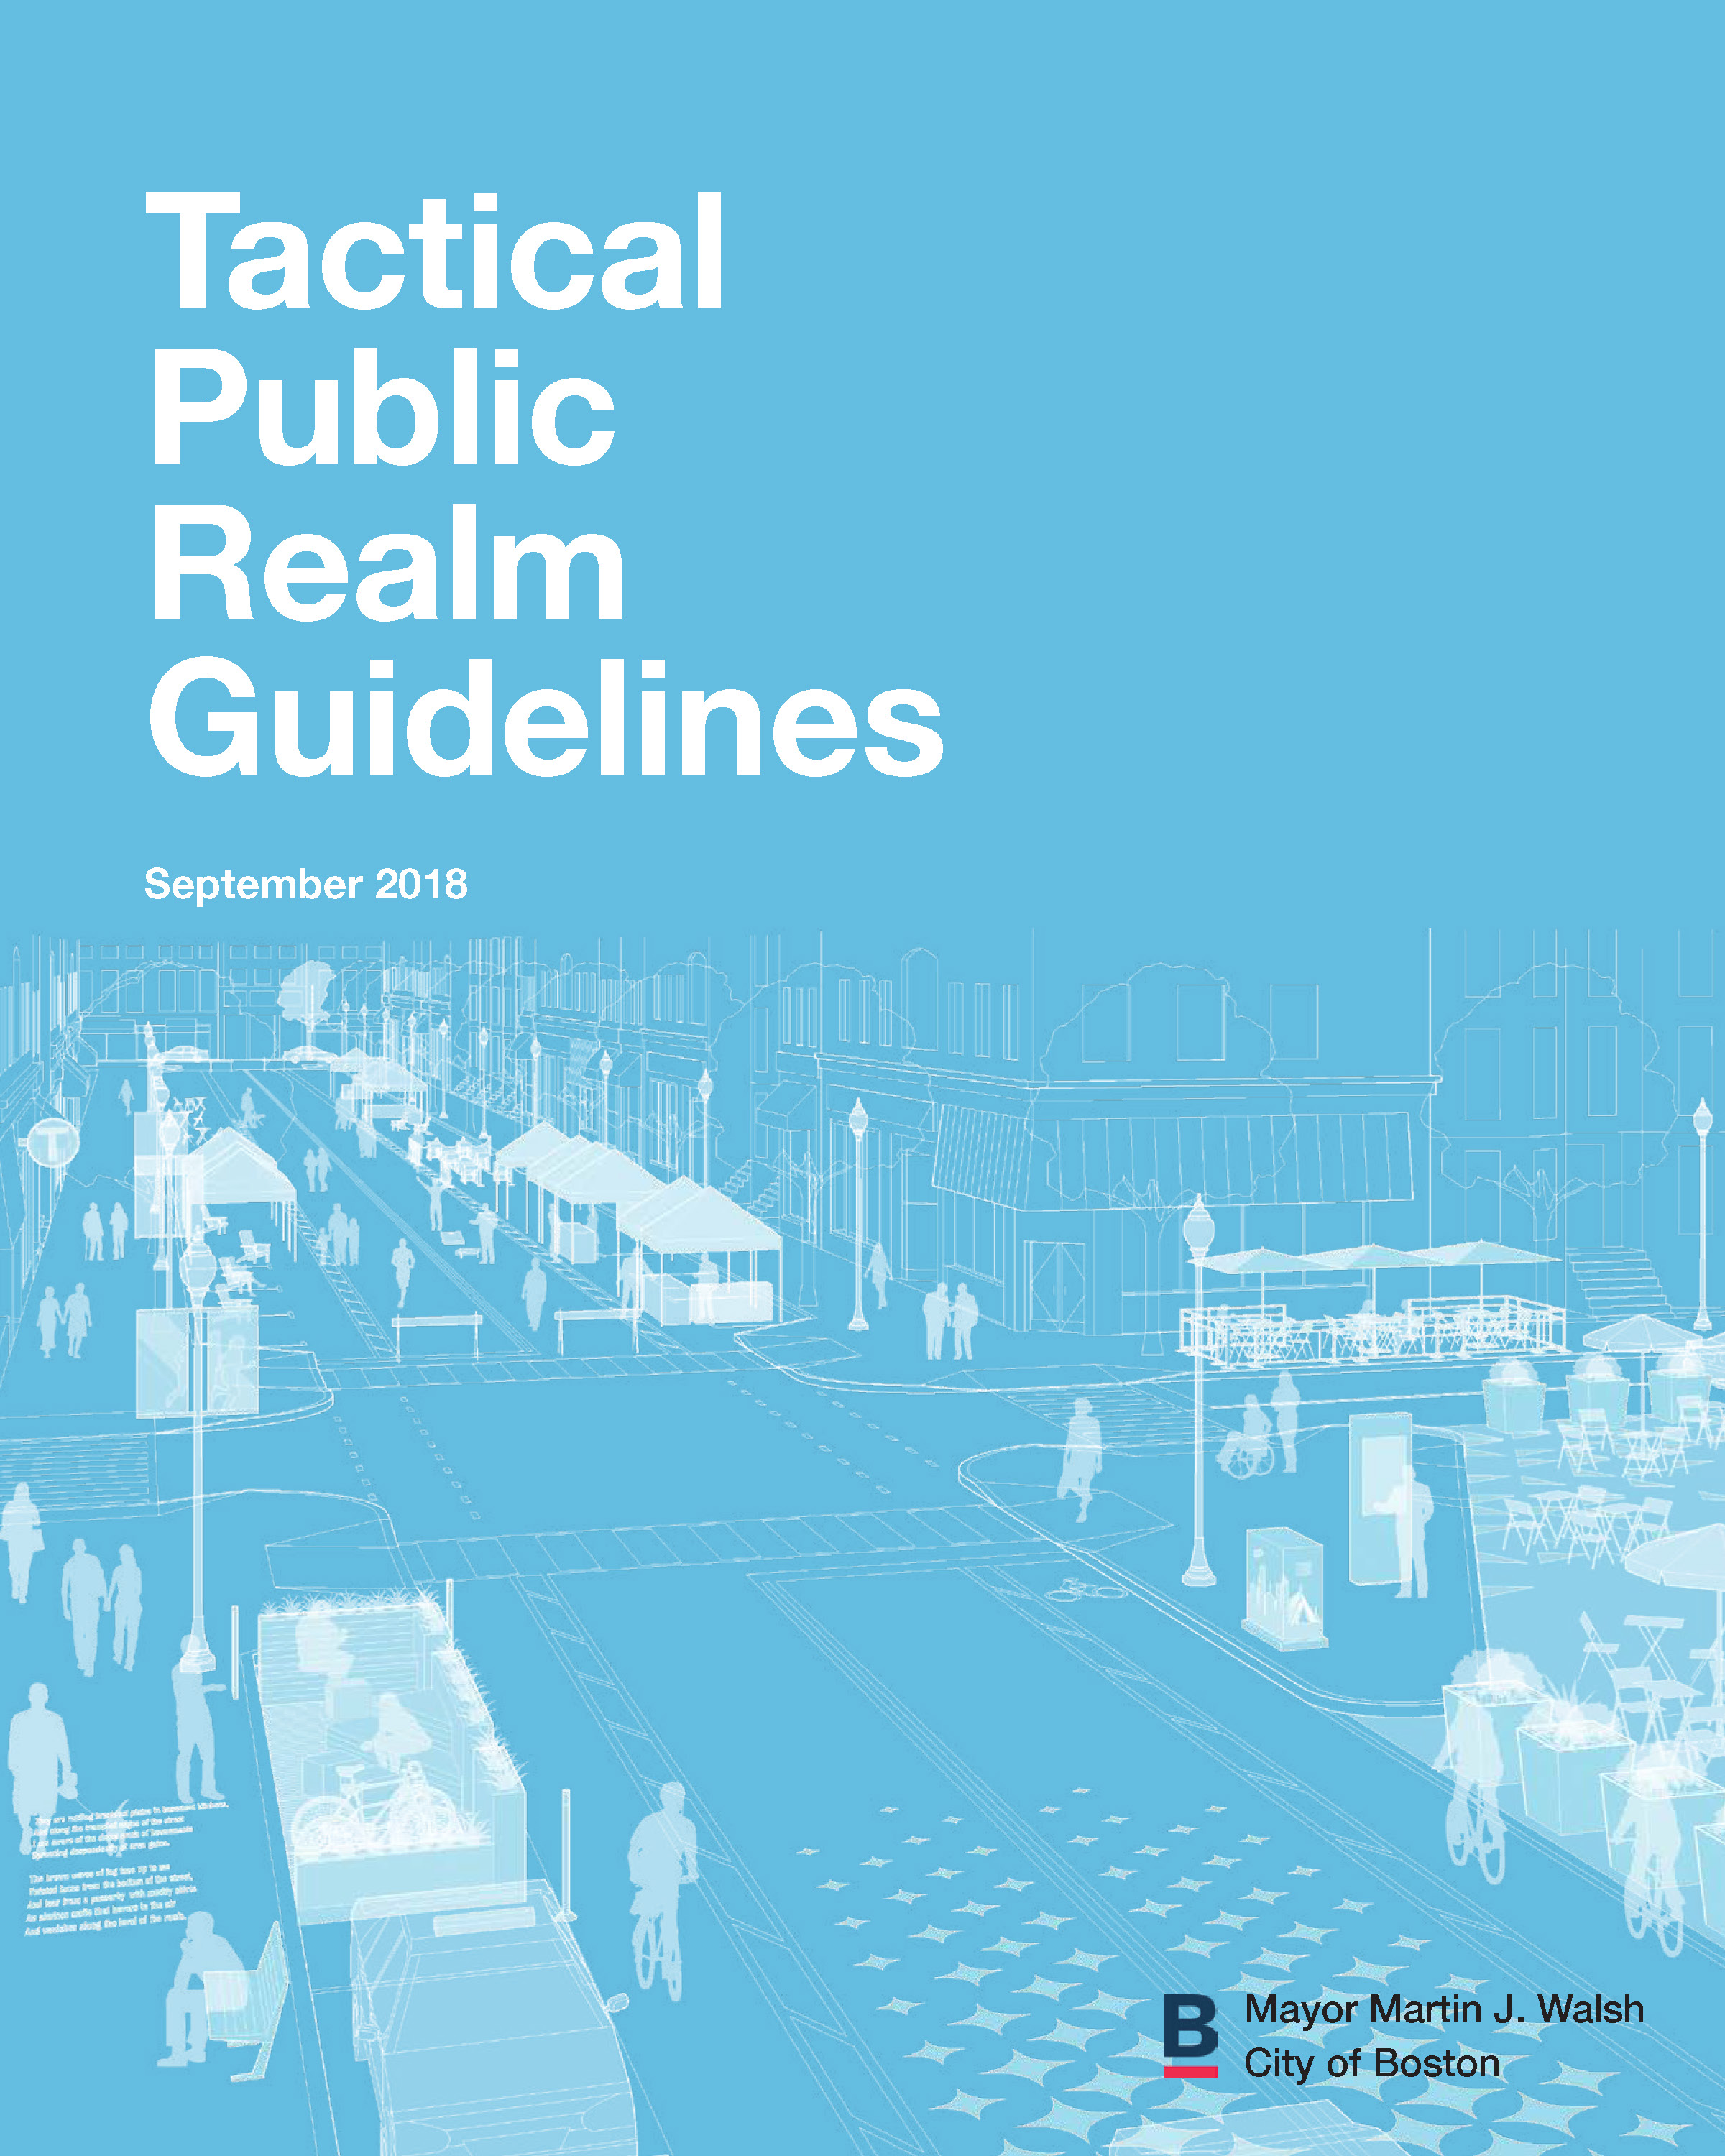 The City of Boston introduces Tactical Public Realm Guidelines